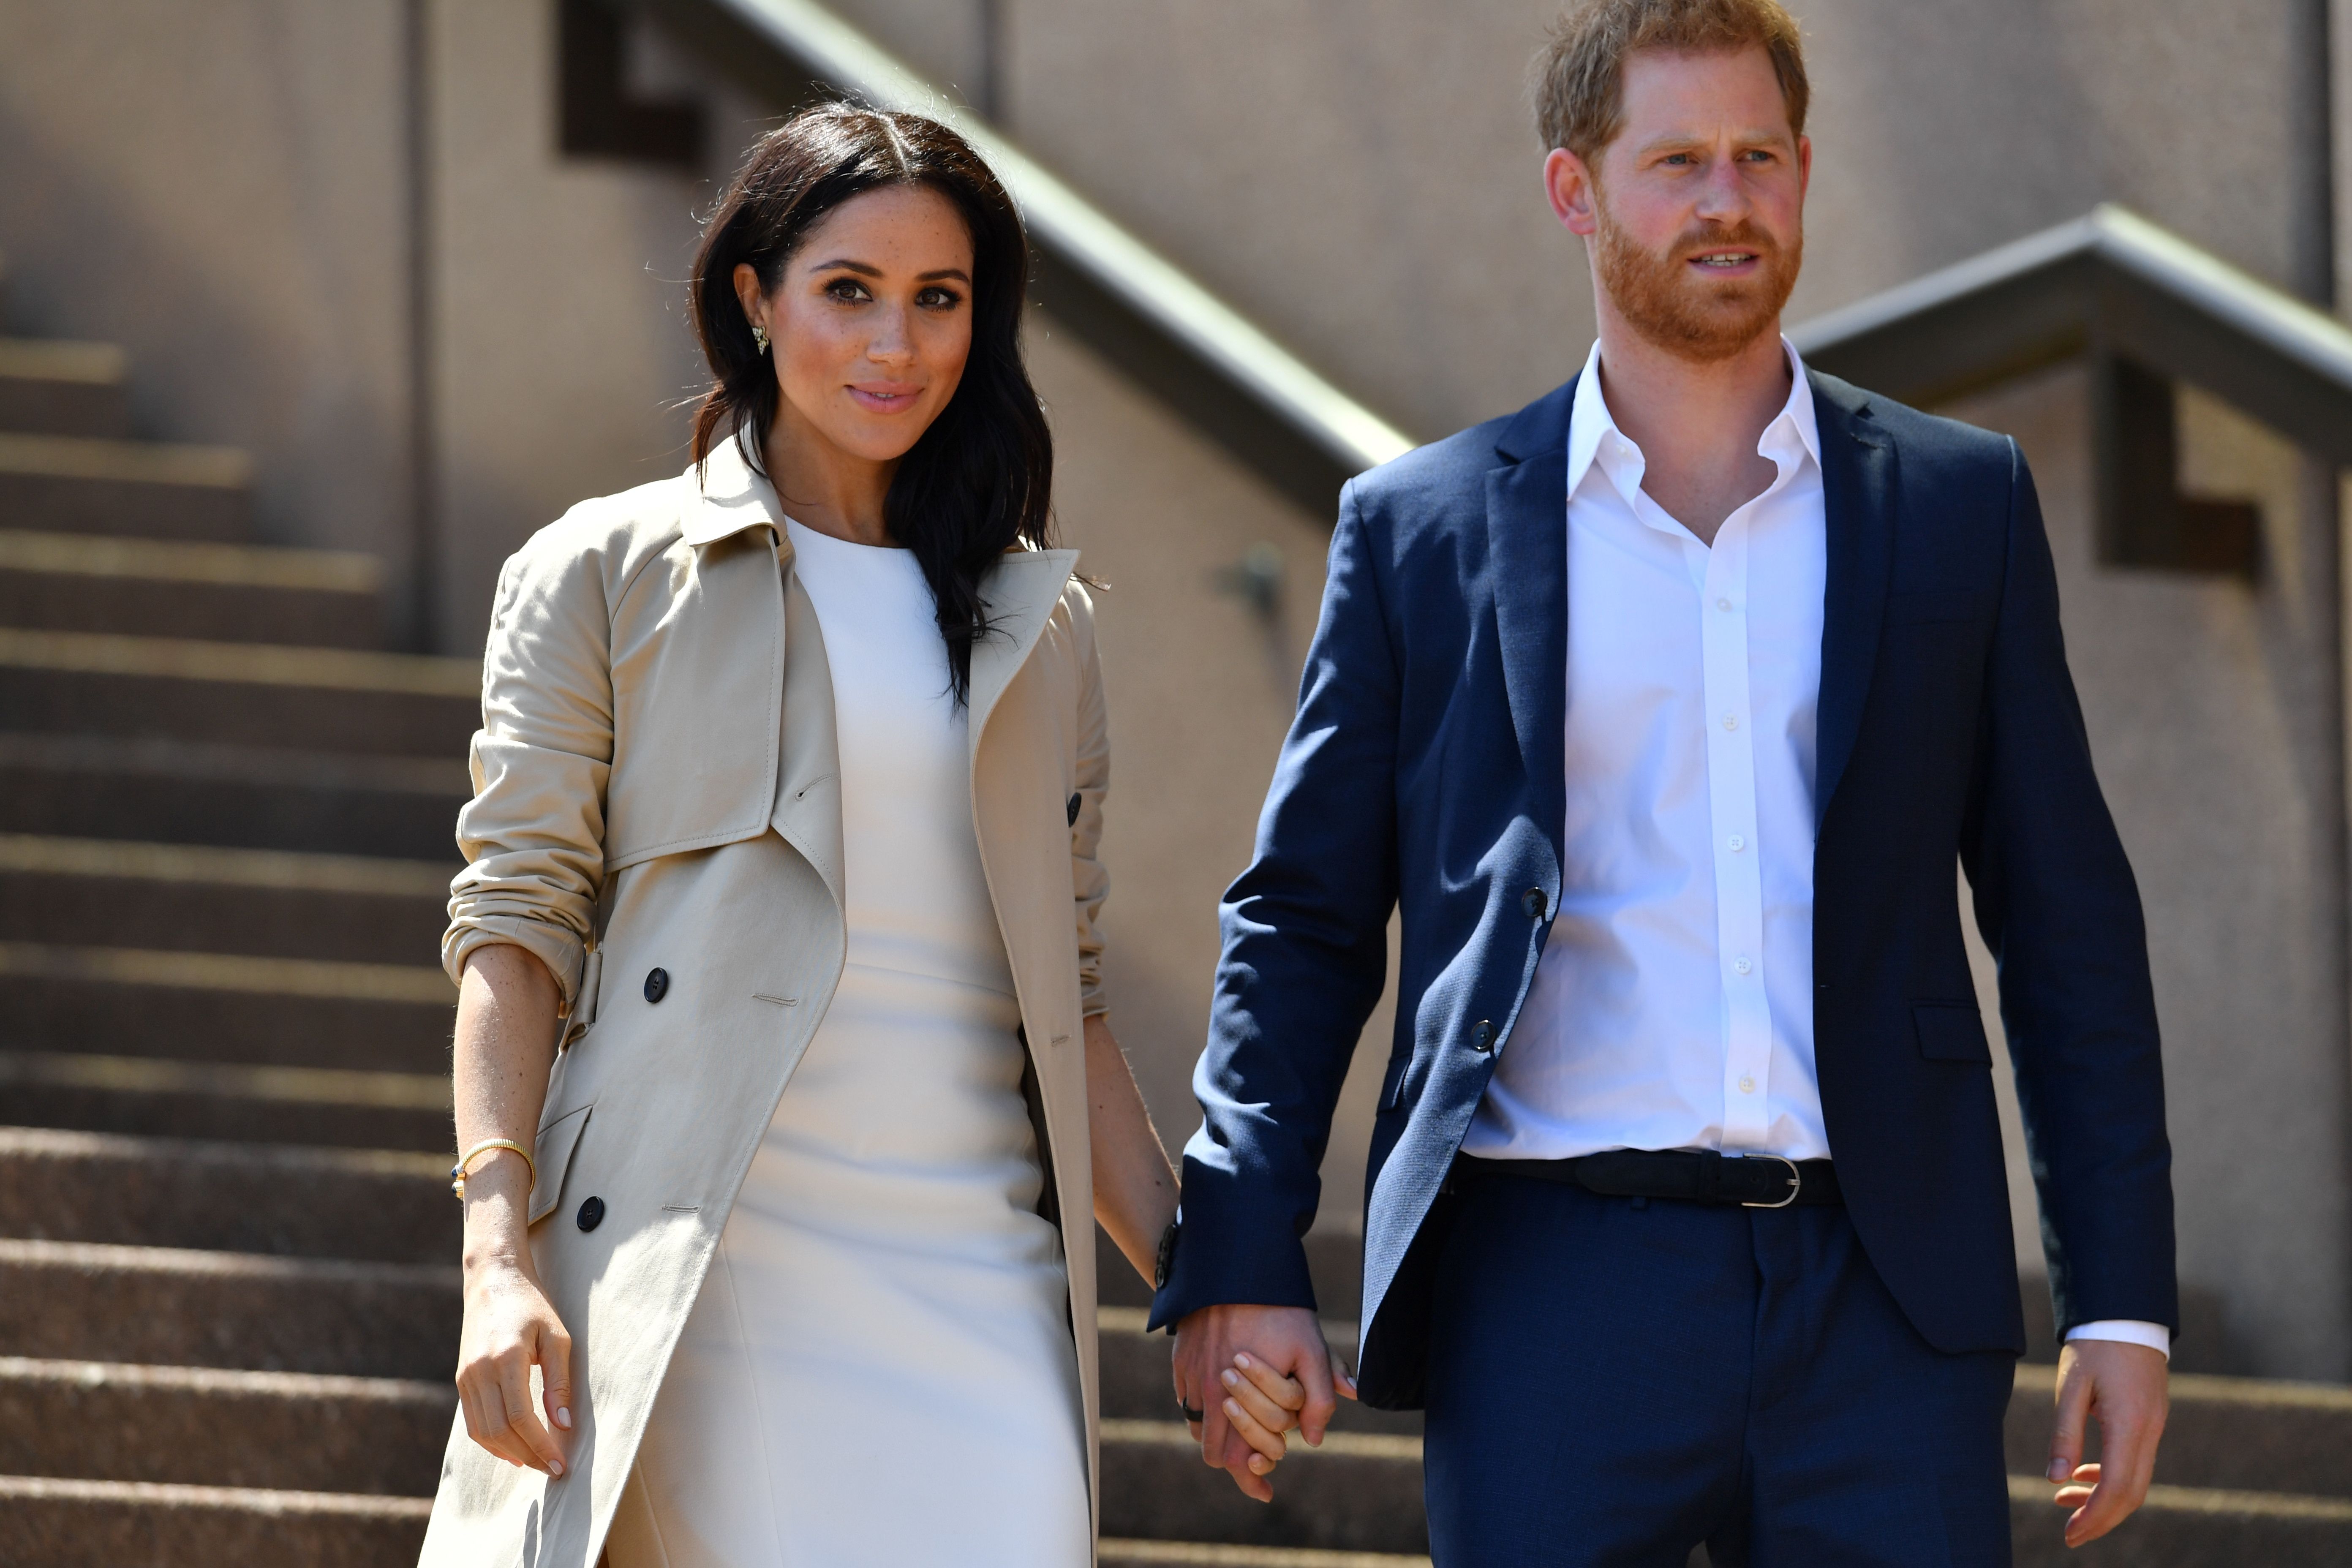 Meghan Markle and Prince Harry hold hands as the walk down the stairs.